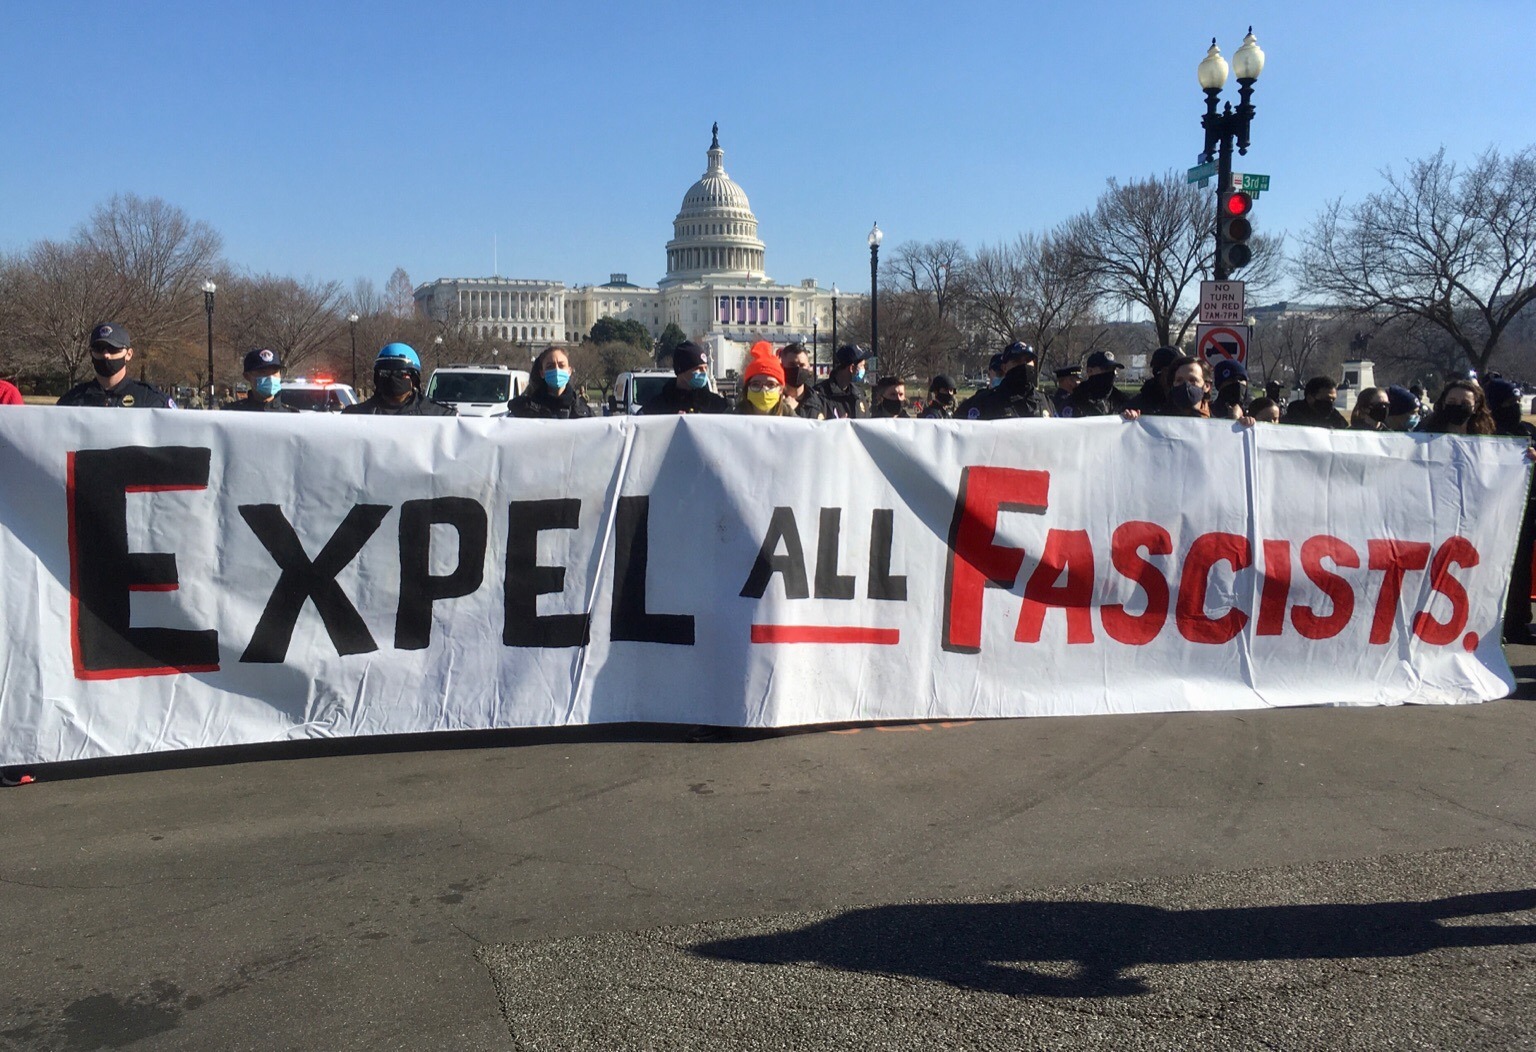 Expel all fascists banner